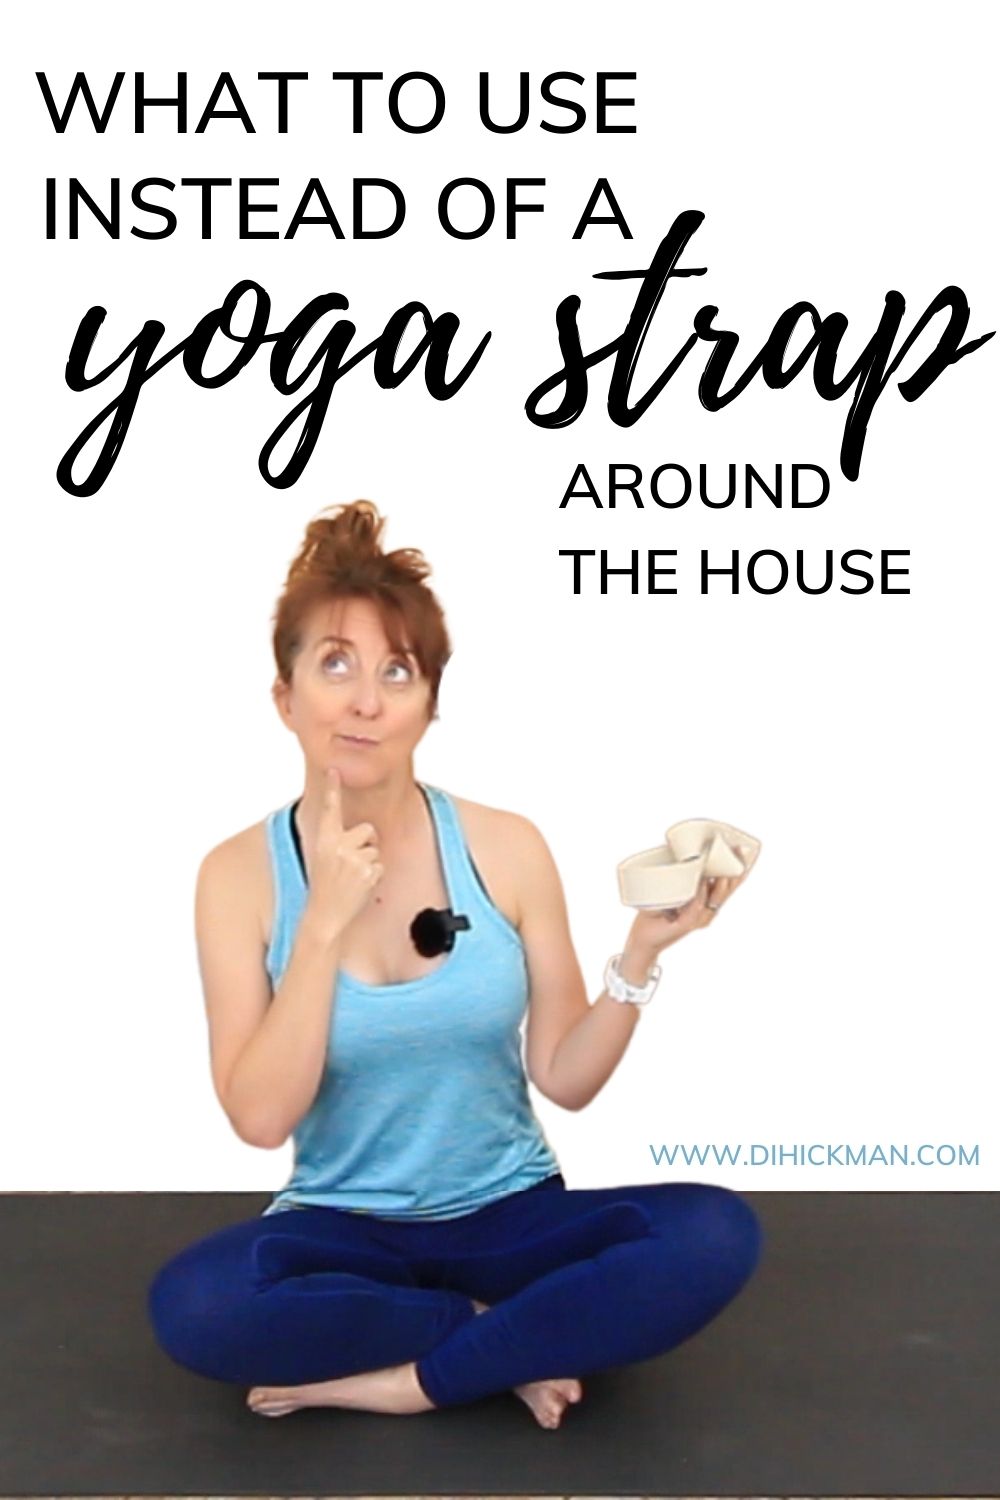 what to use instead of a yoga strap, around the house